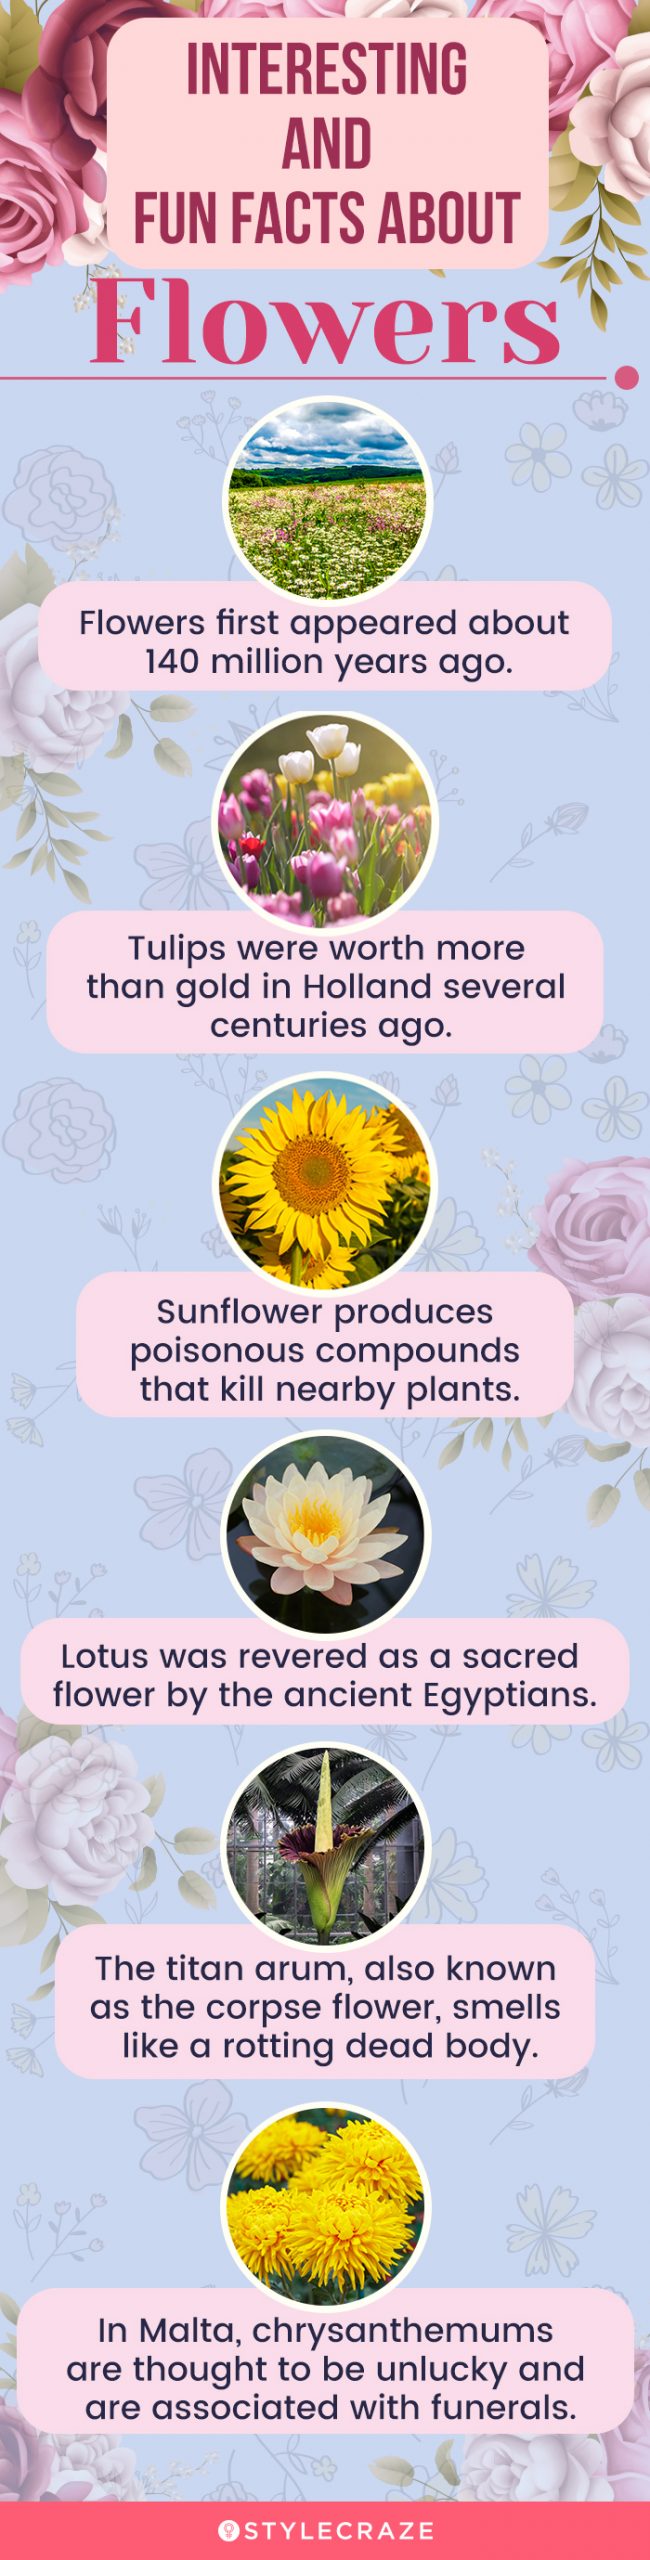 interesting and fun facts about flowers [infographic]